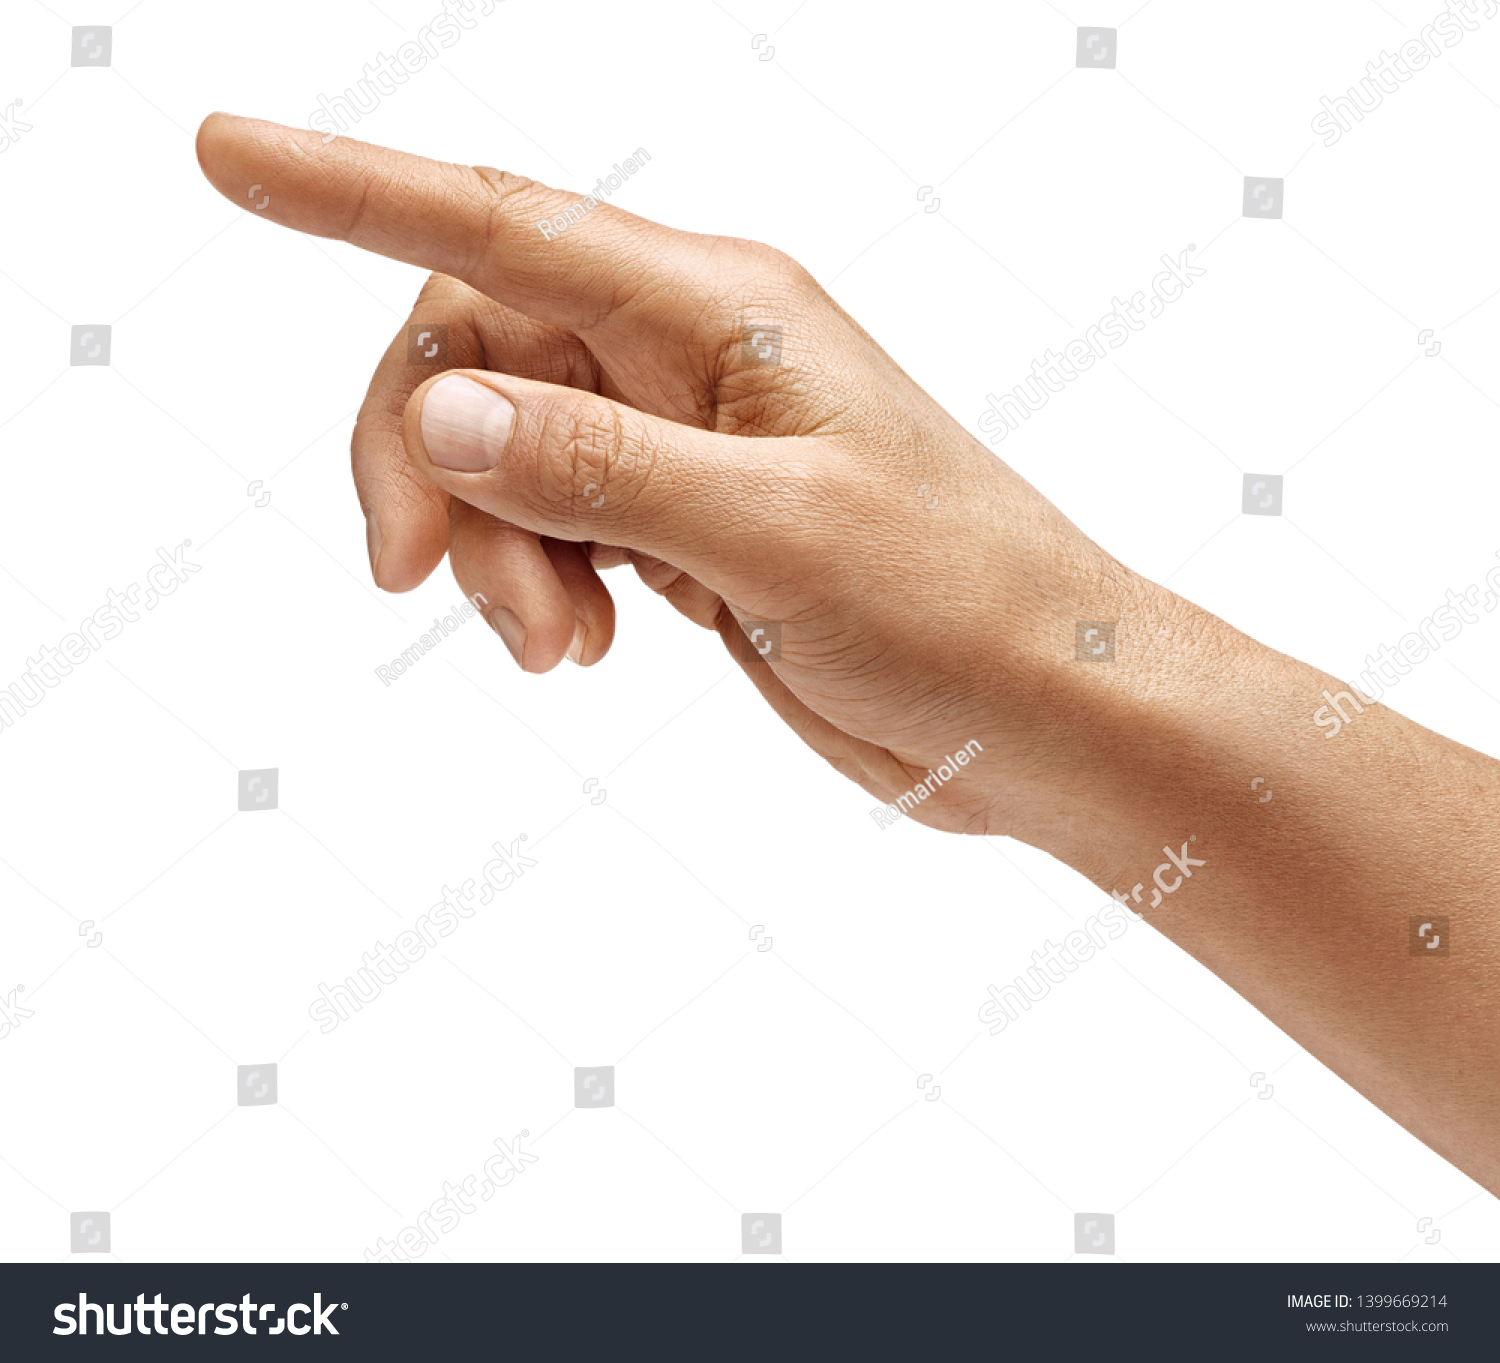 Man's hand touching or pointing to something isolated on white background. Close up. High resolution. #1399669214